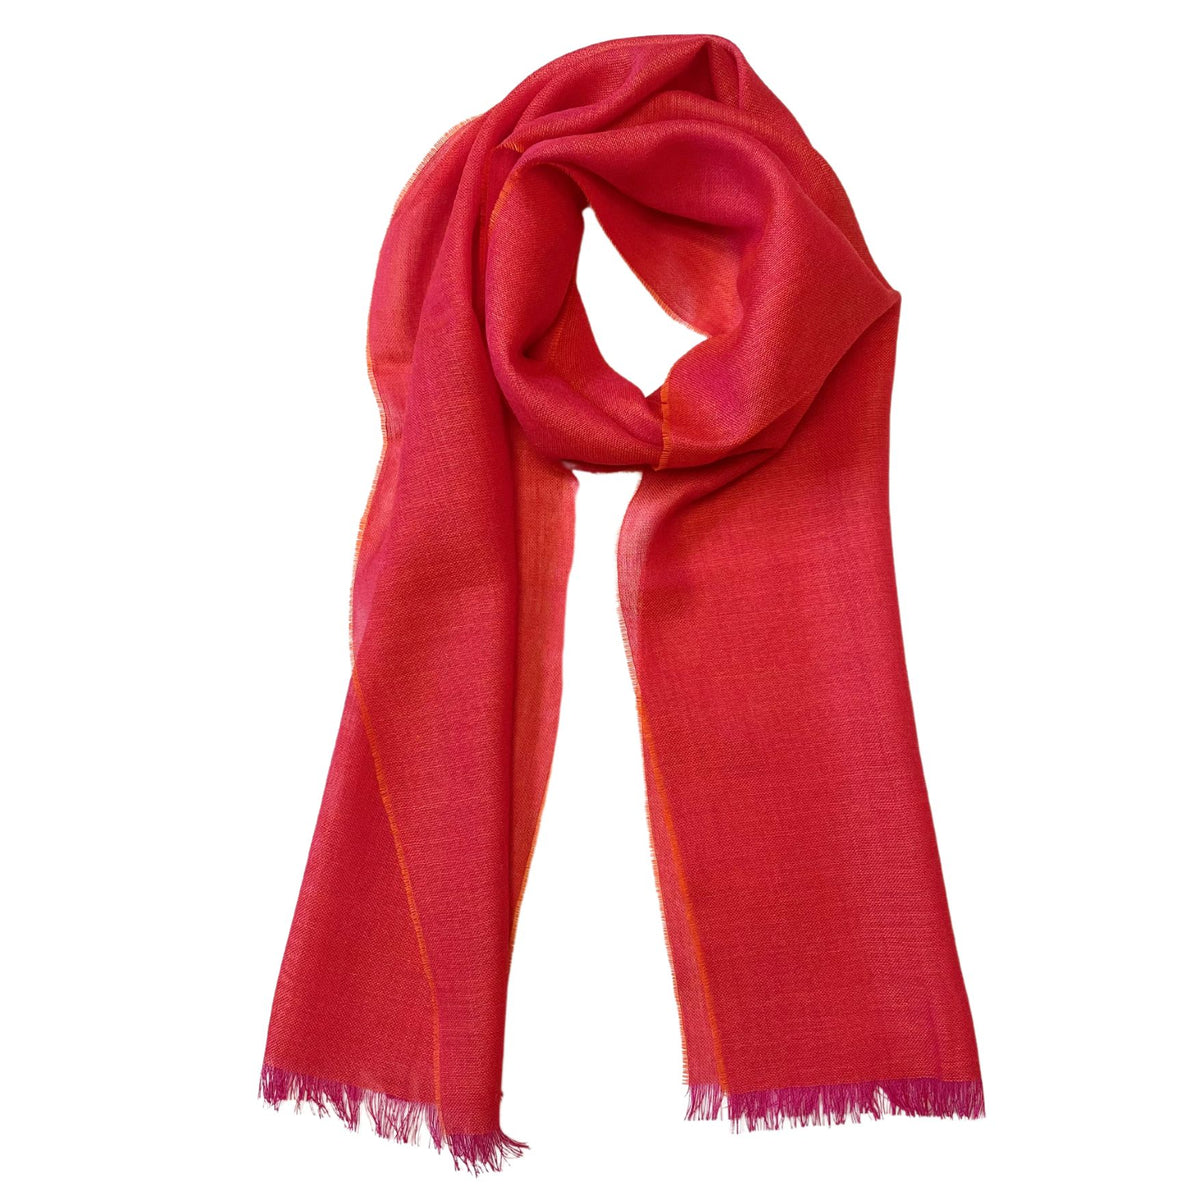 Crimson Fire red alpaca scarf for women.  Very colorful.